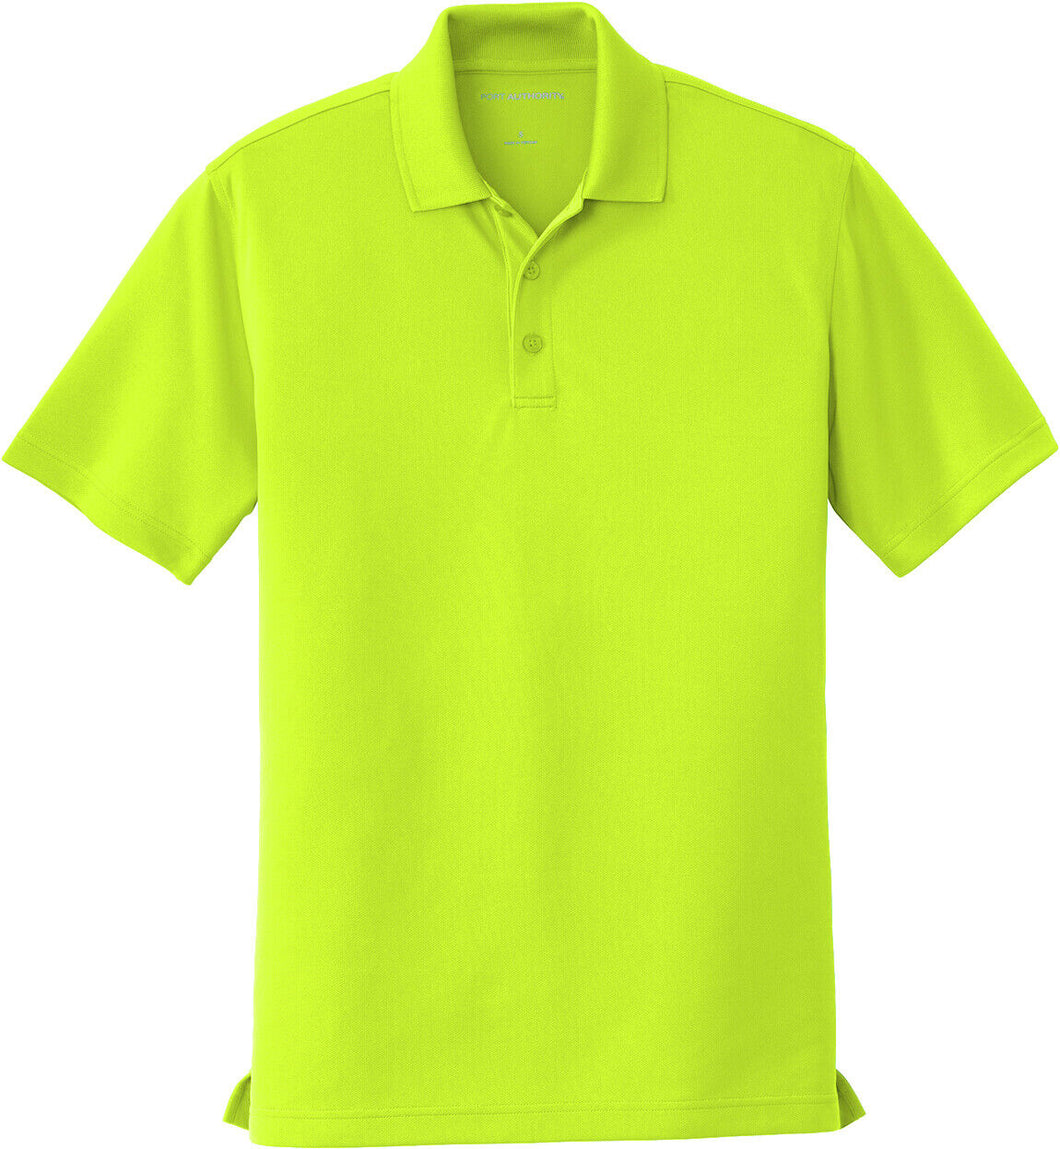 Mens Safety Yellow Moisture Wicking Polo Shirt UPF 30 Snag Resistant XS-6XL NEW!